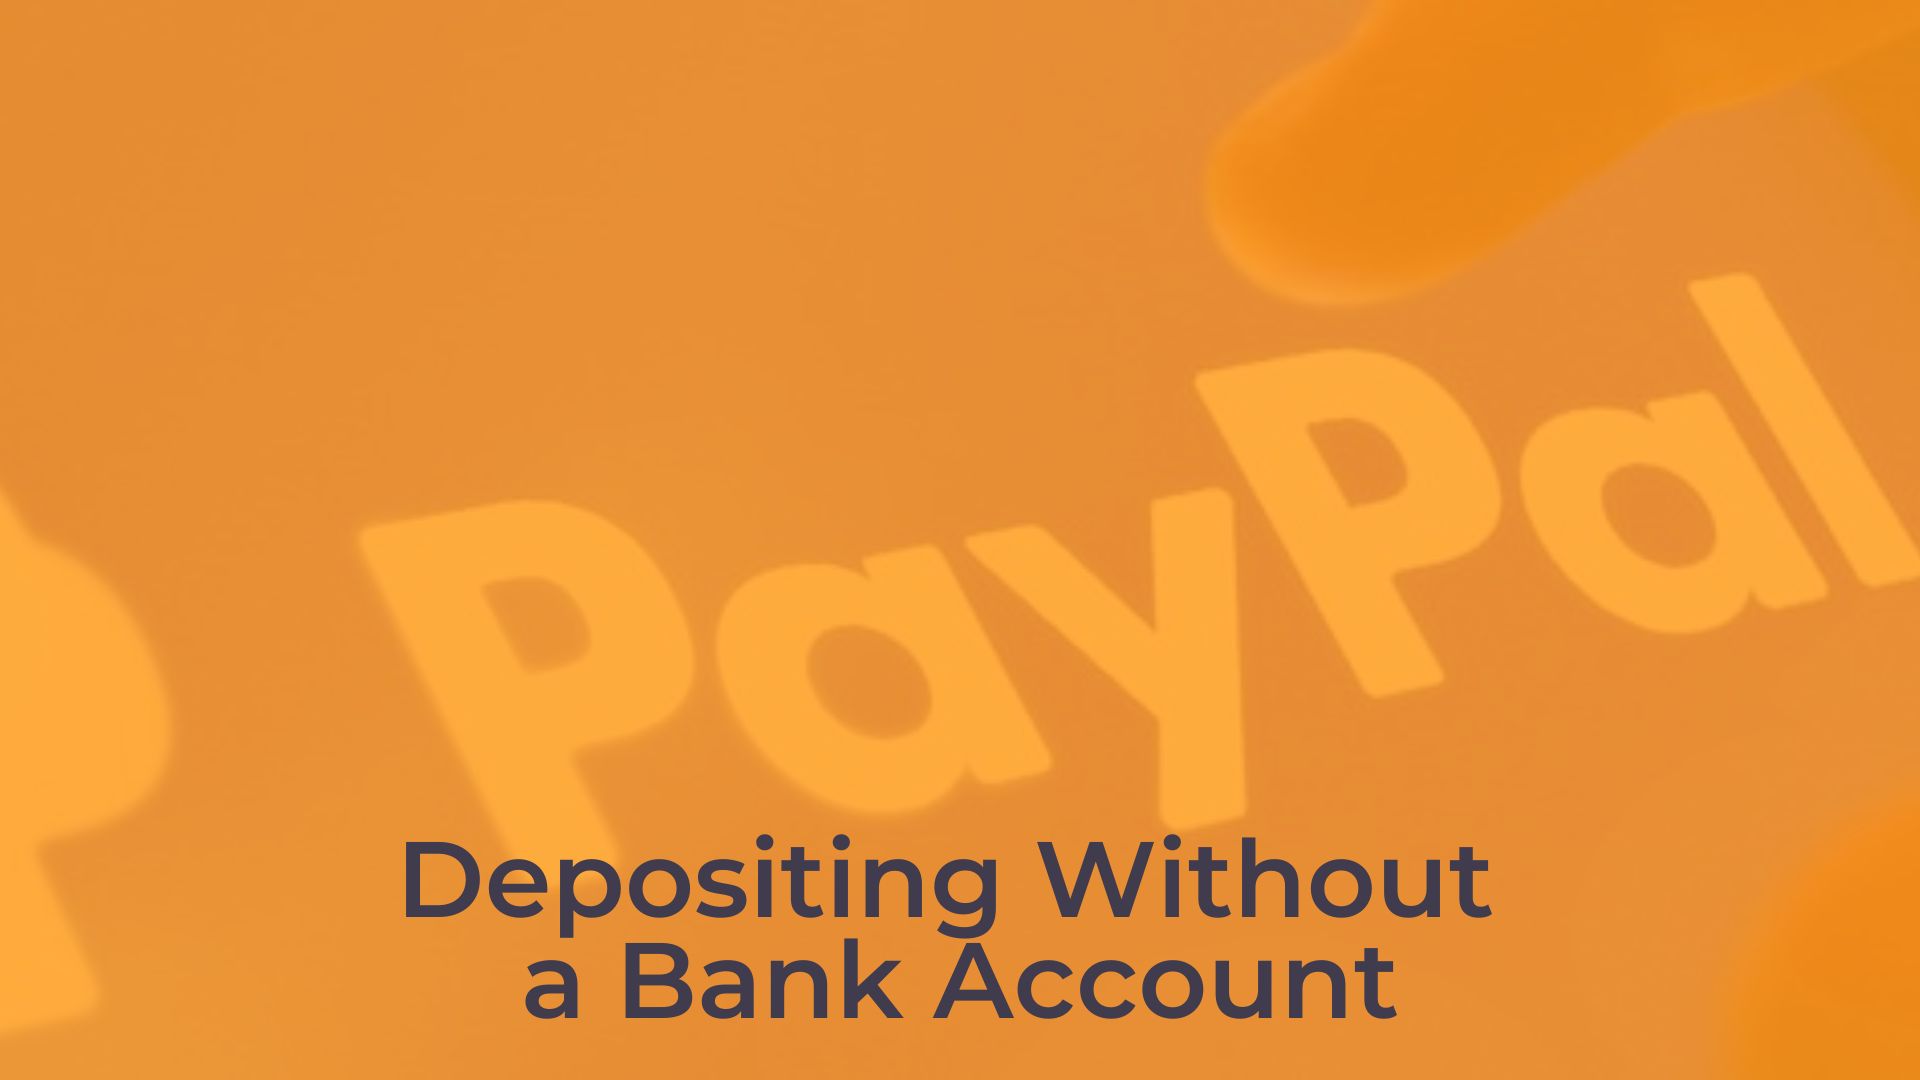 Depositing Without a Bank Account